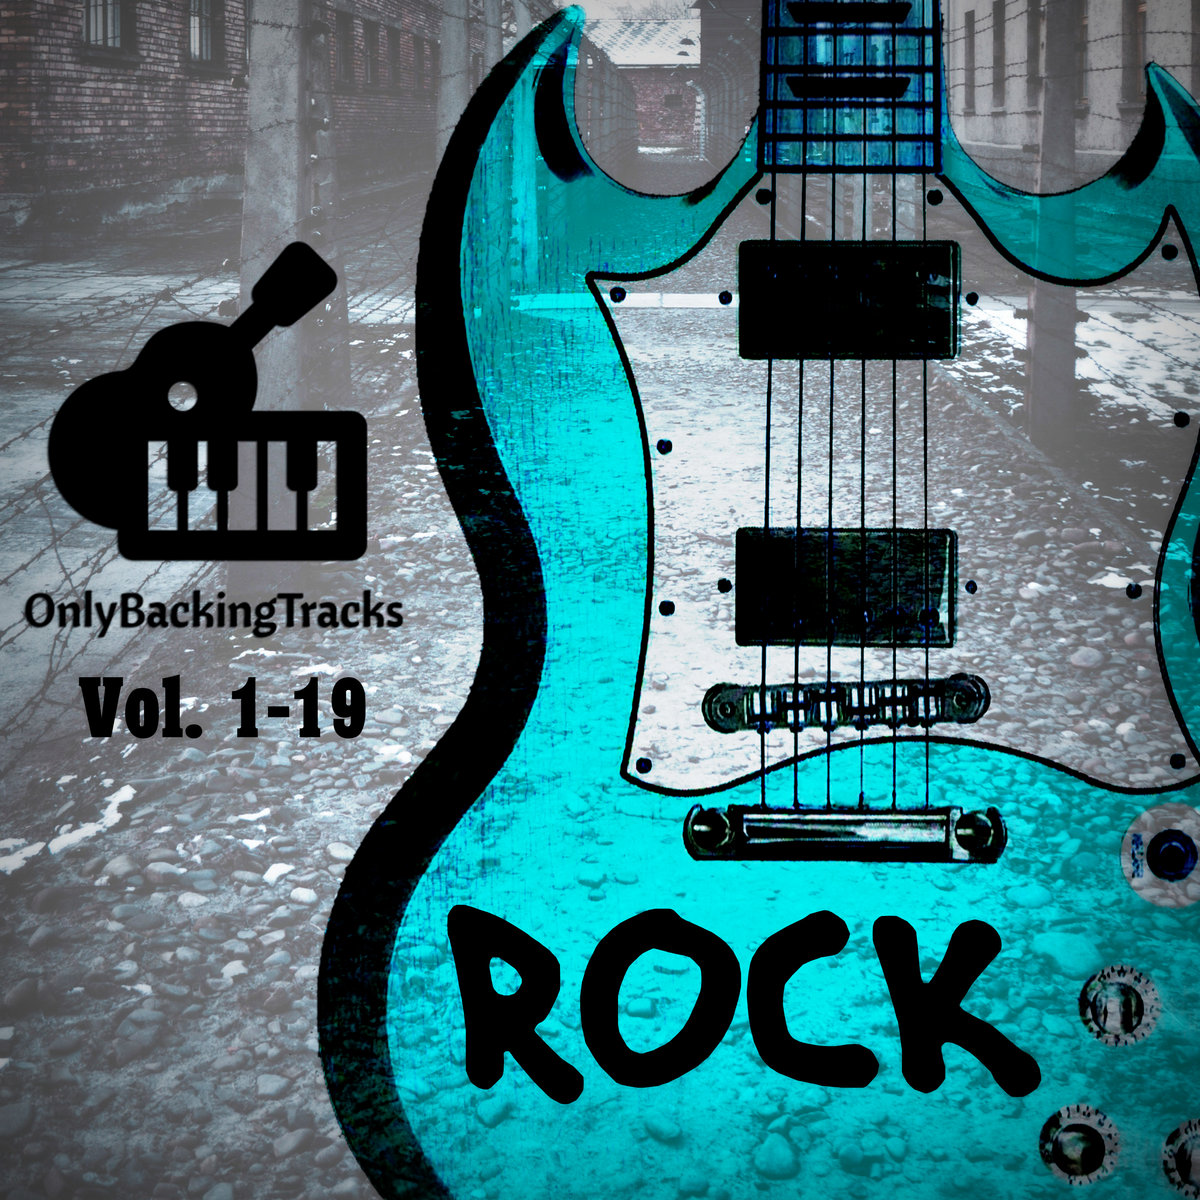 Back track am. Indie Rock. Backing track. Backing track am. Rock only.